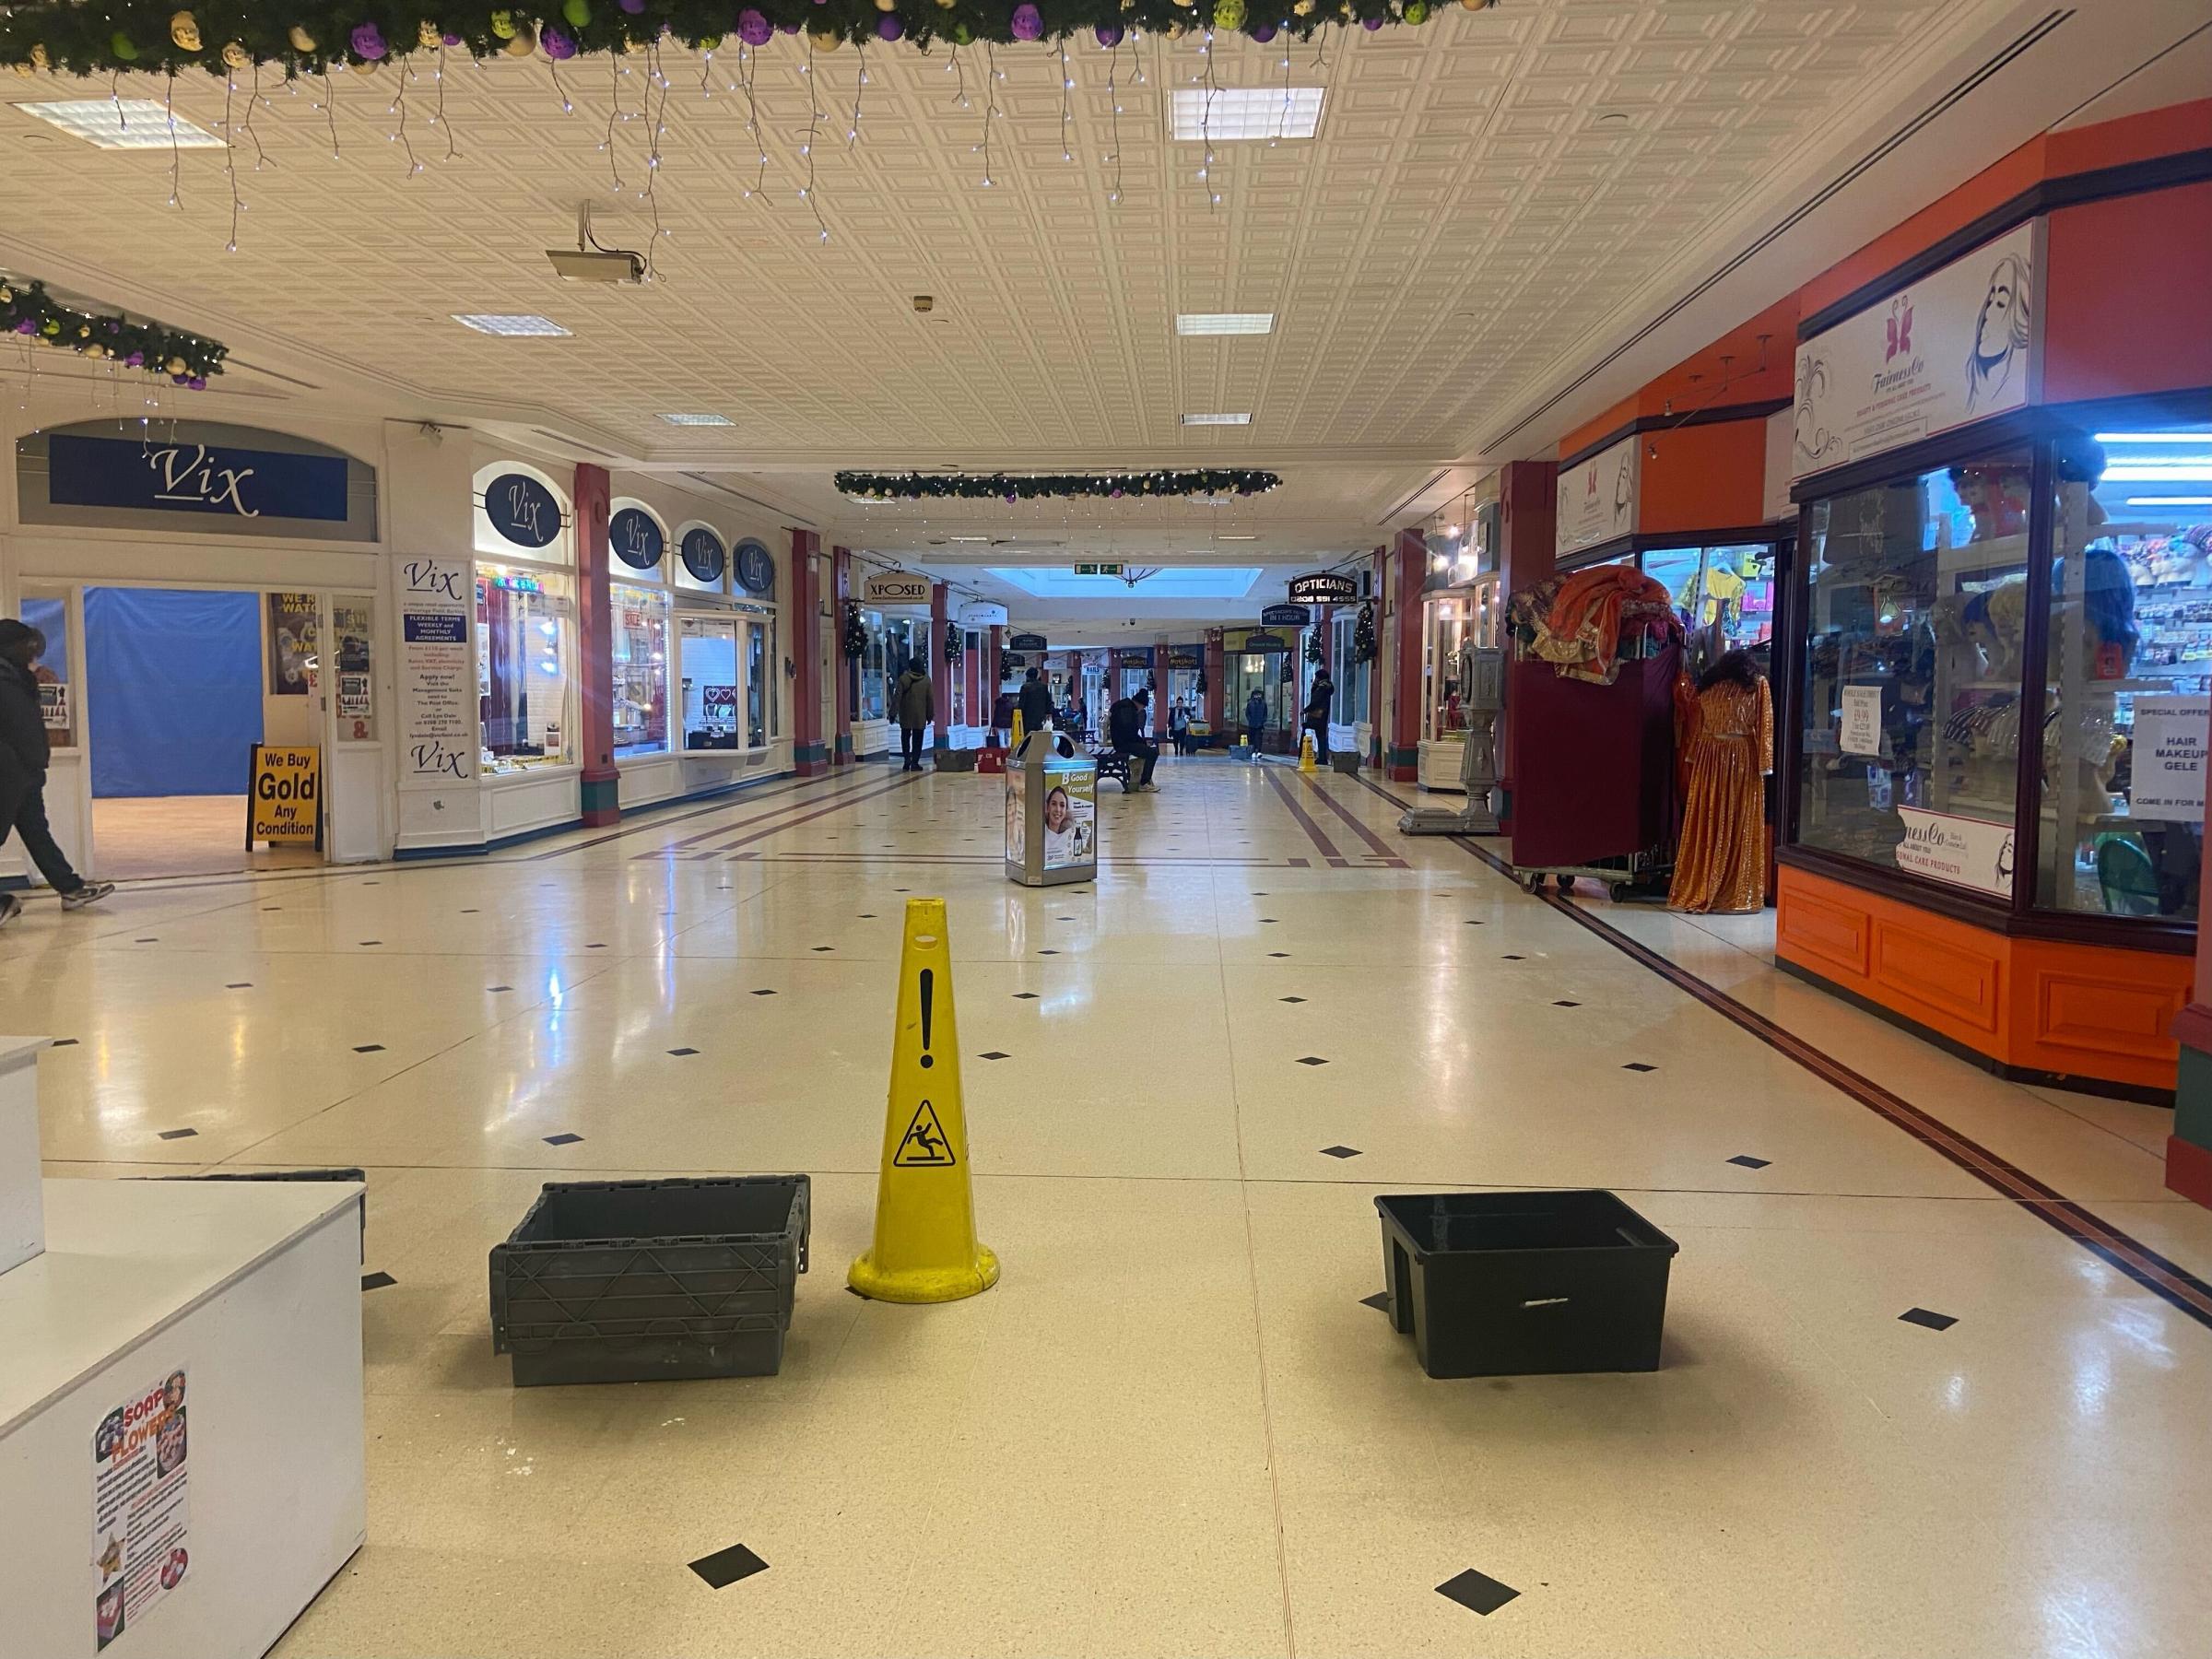 The shopping centre is plagued by leaks